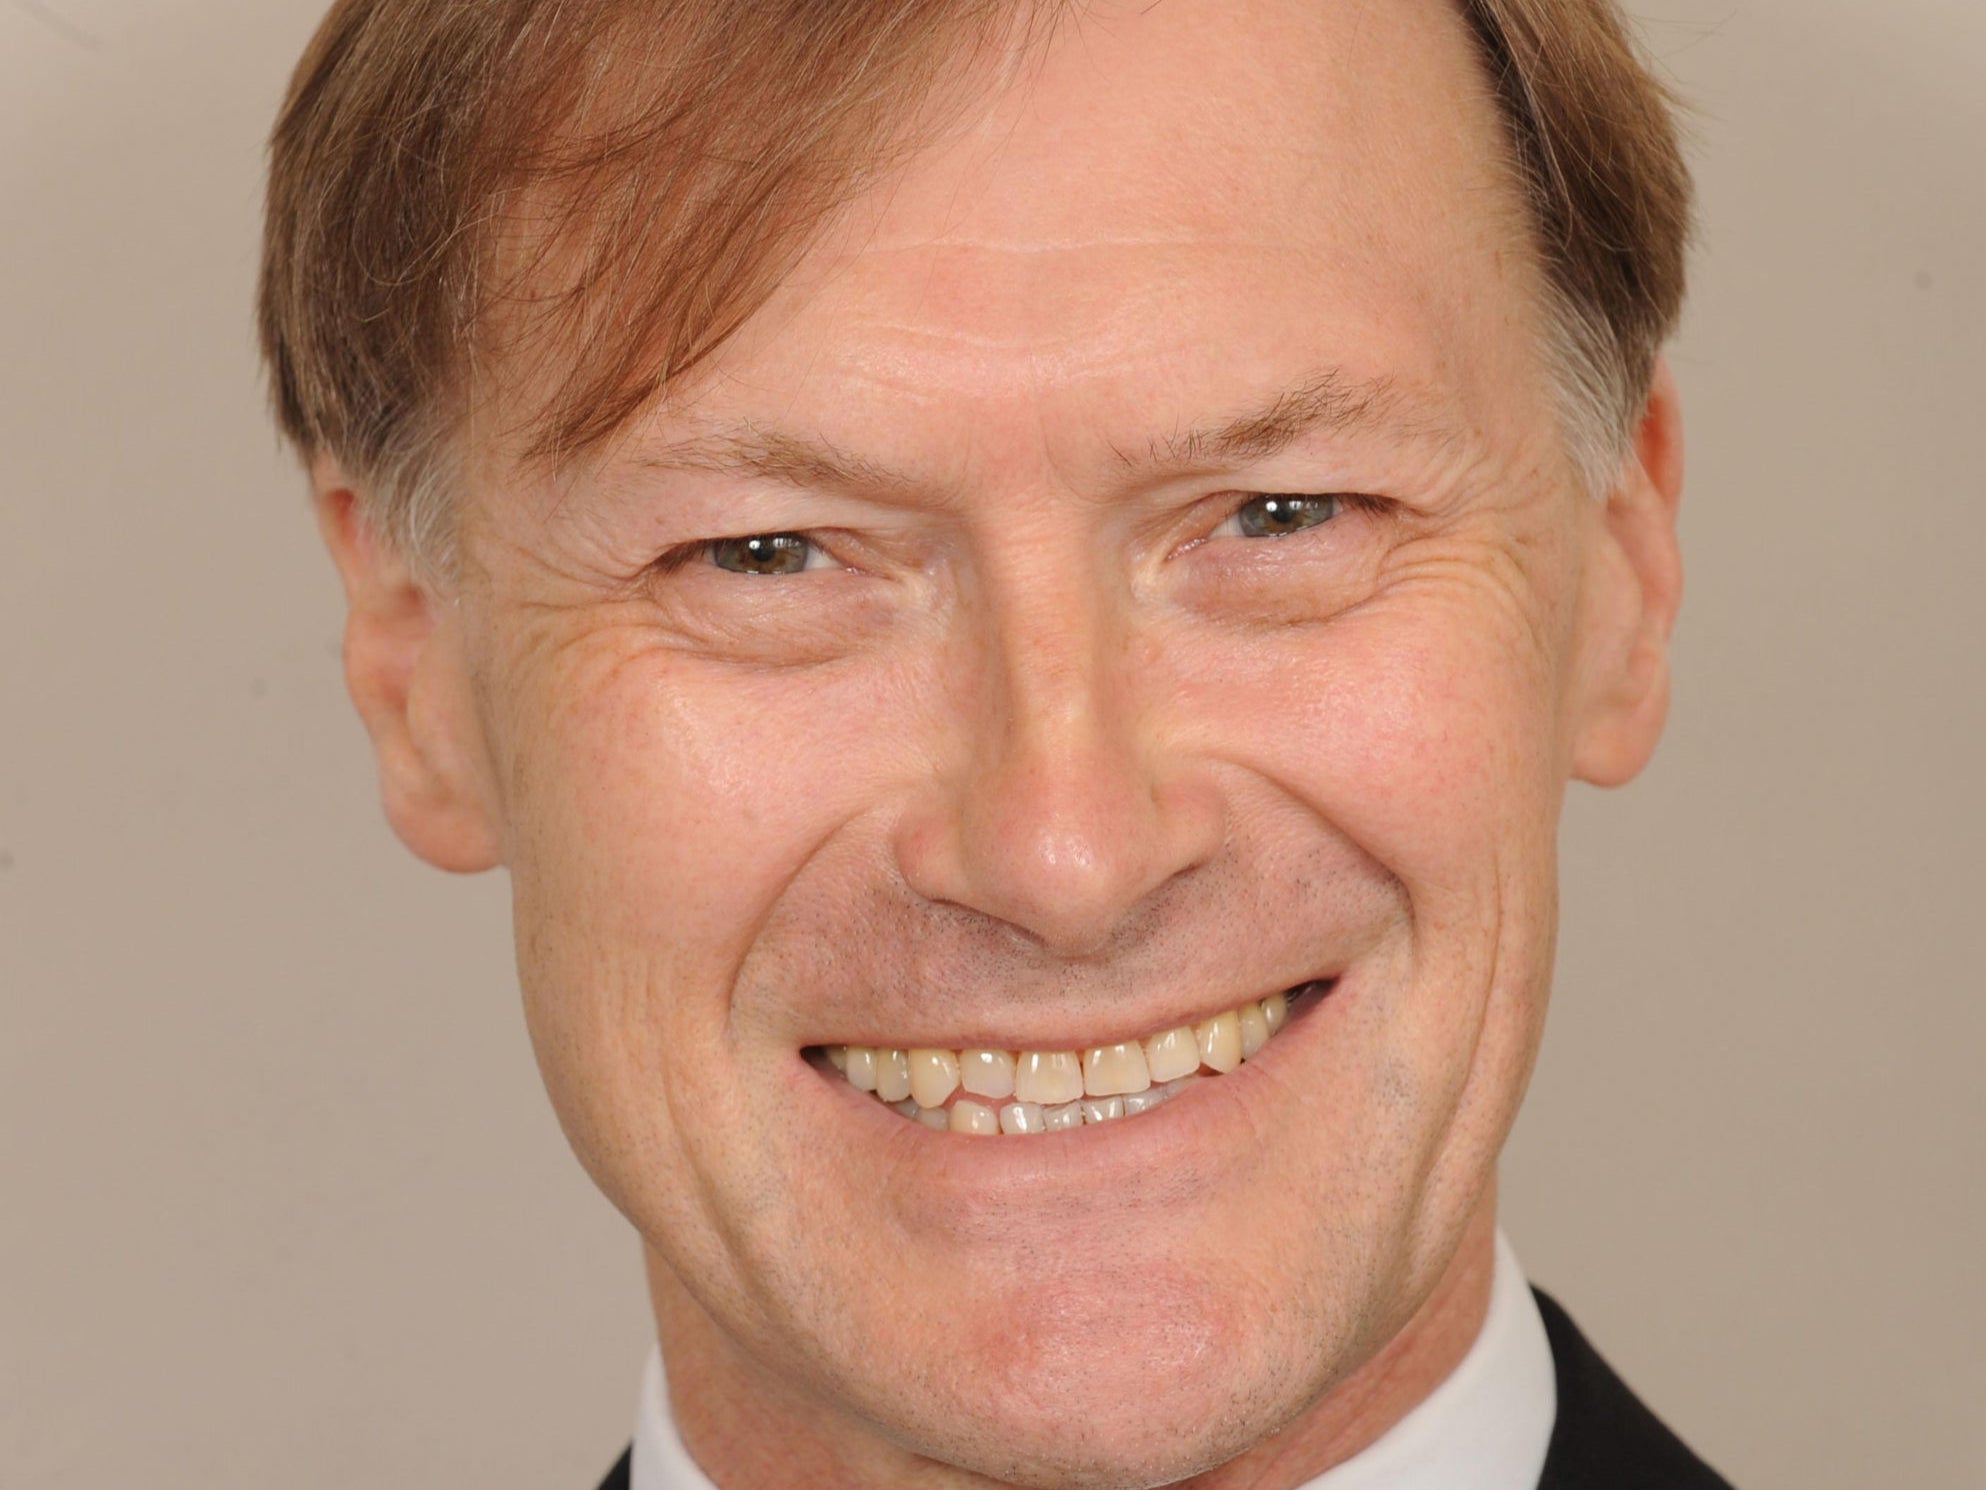 Tributes have been paid to the murdered MP David Amess